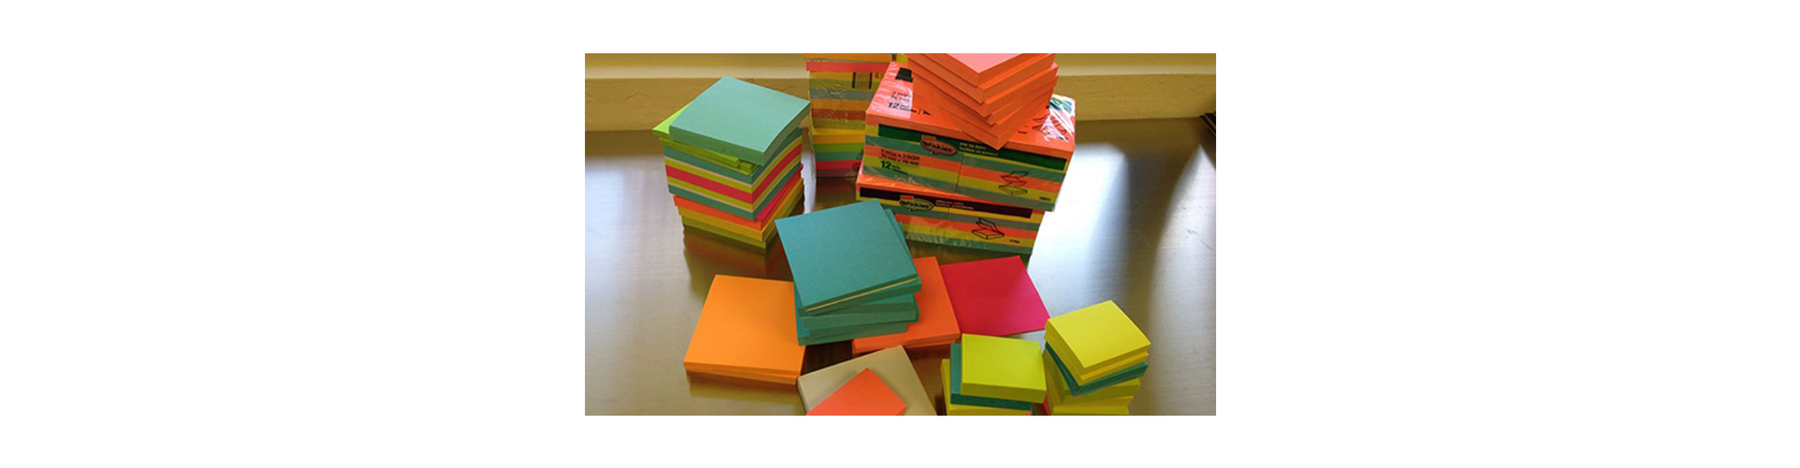 History and Evolution of Post-It Notes